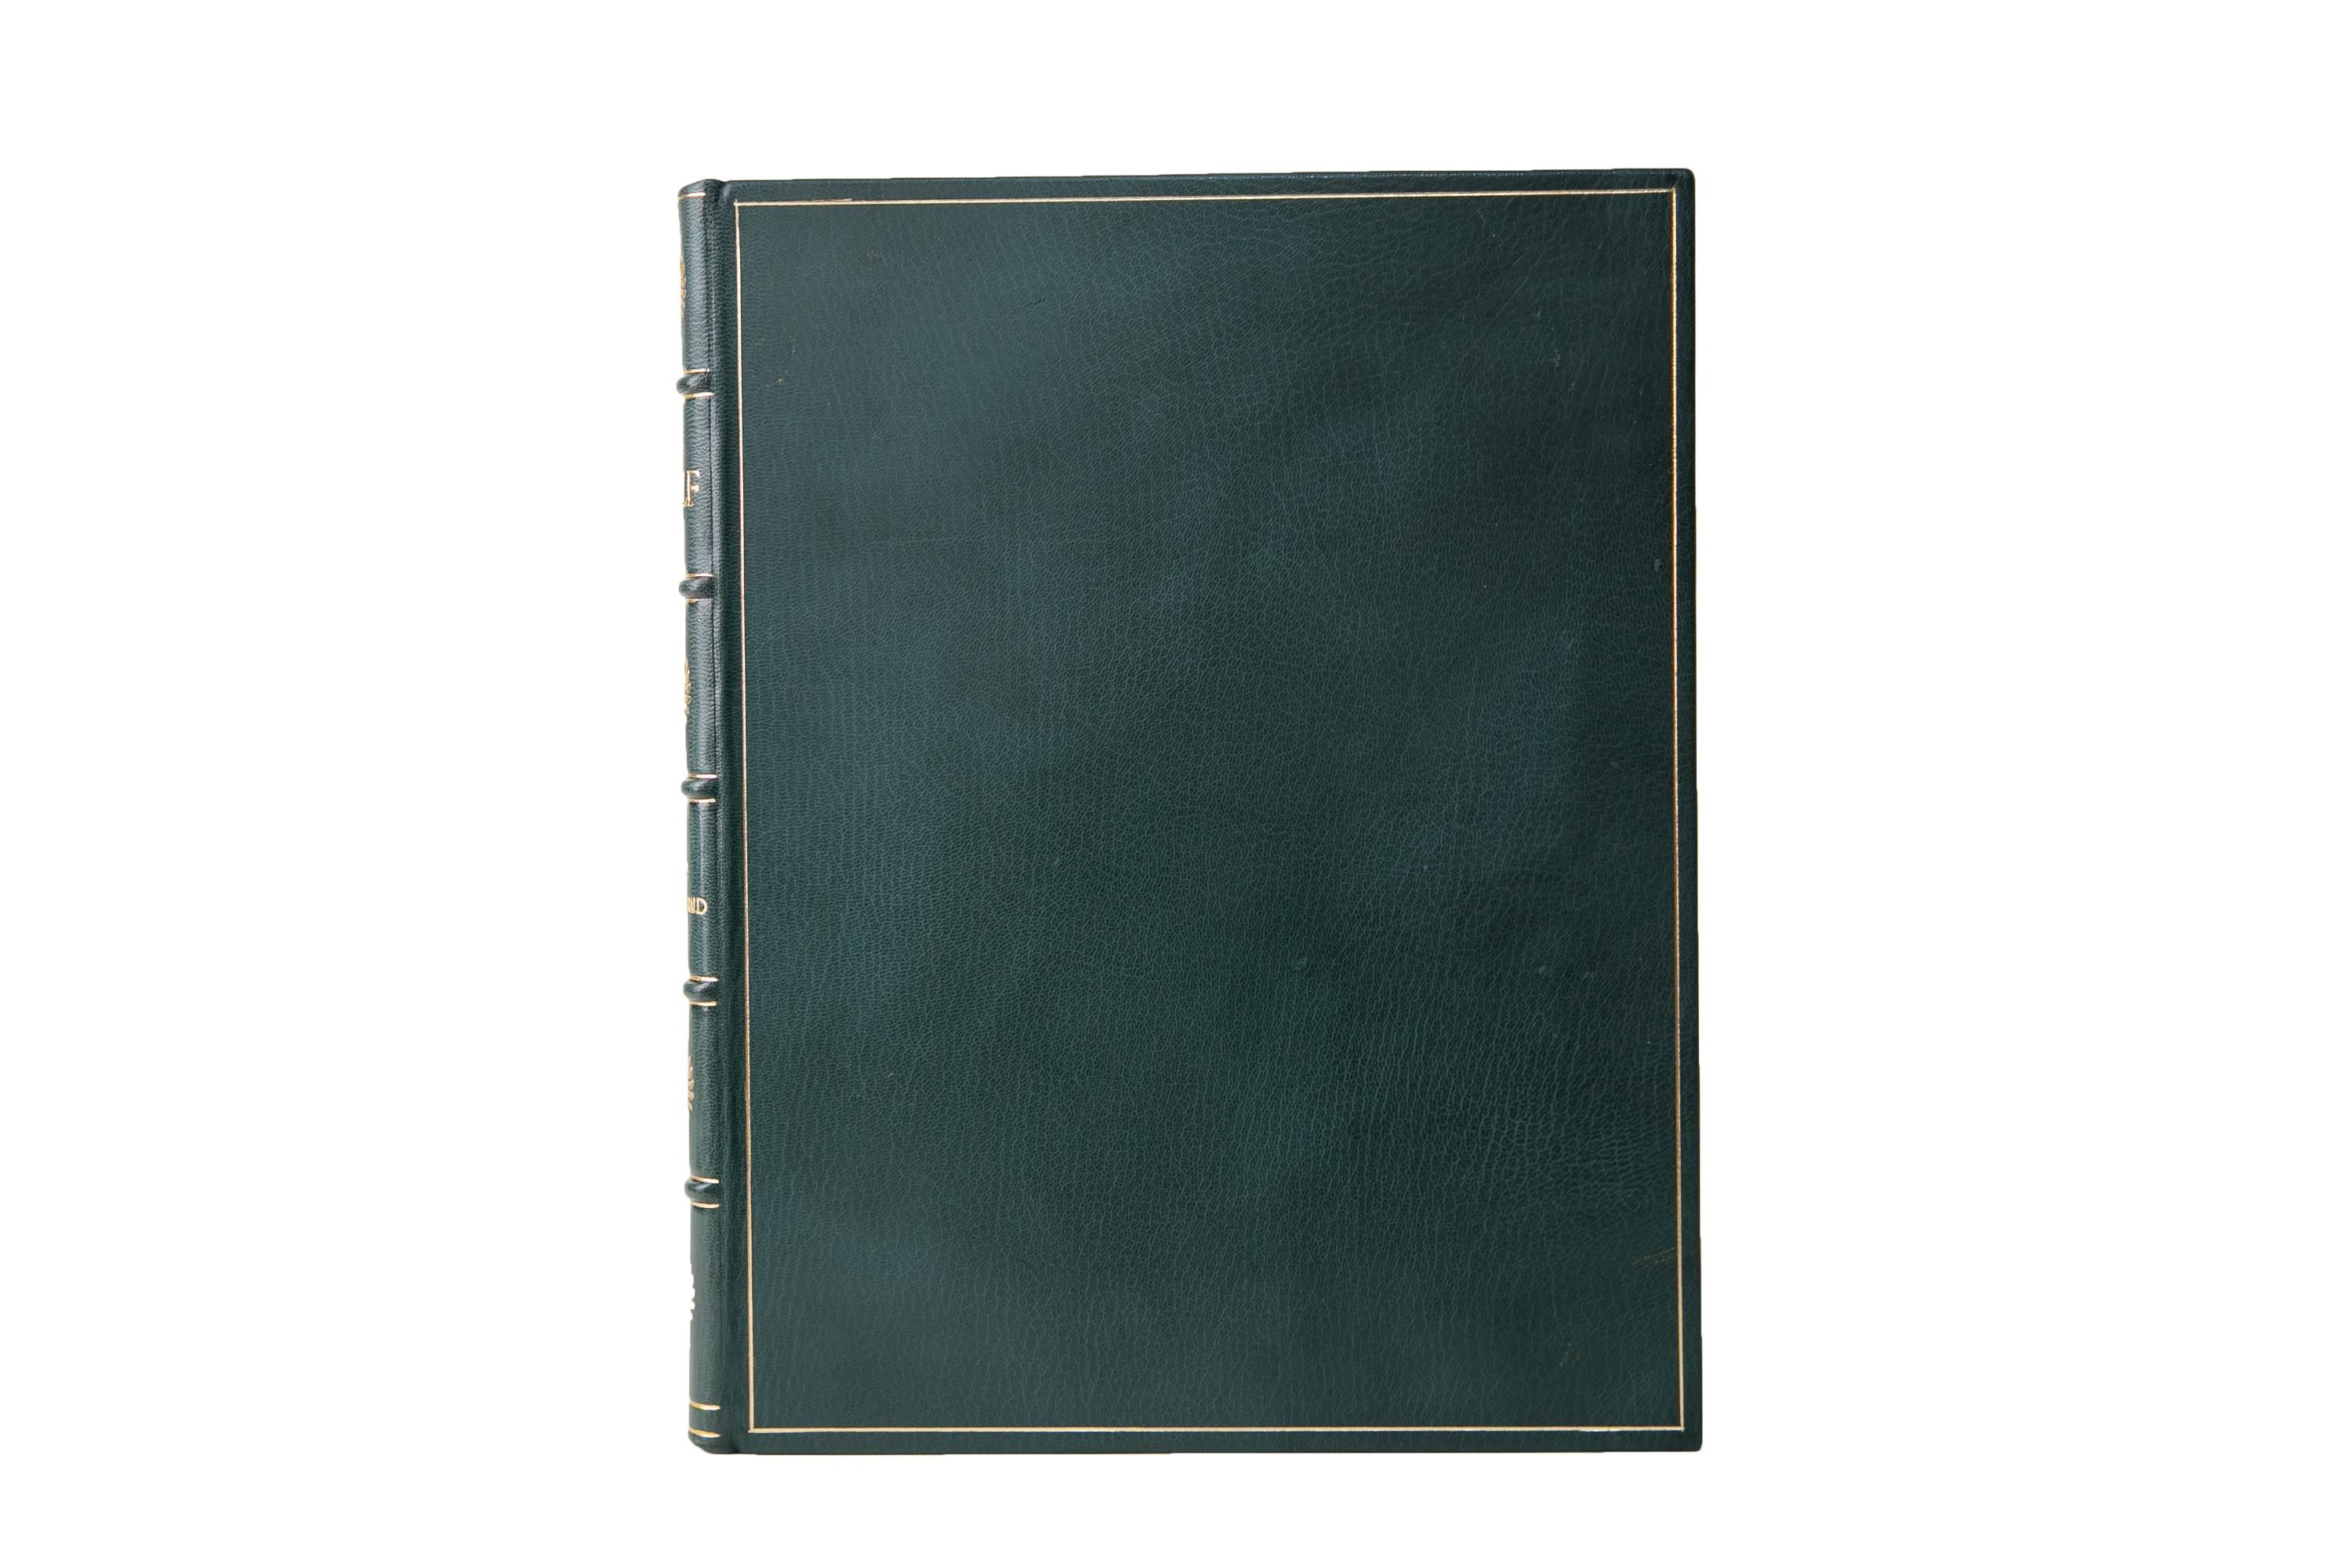 1 Volume. Bob MacDonald, Golf. First Edition. Bound in full green morocco with the covers displaying a gilt-tooled border, The spine displays raised bands, bordering, floral panel details, and label lettering, all gilt-tooled. All of the edges are